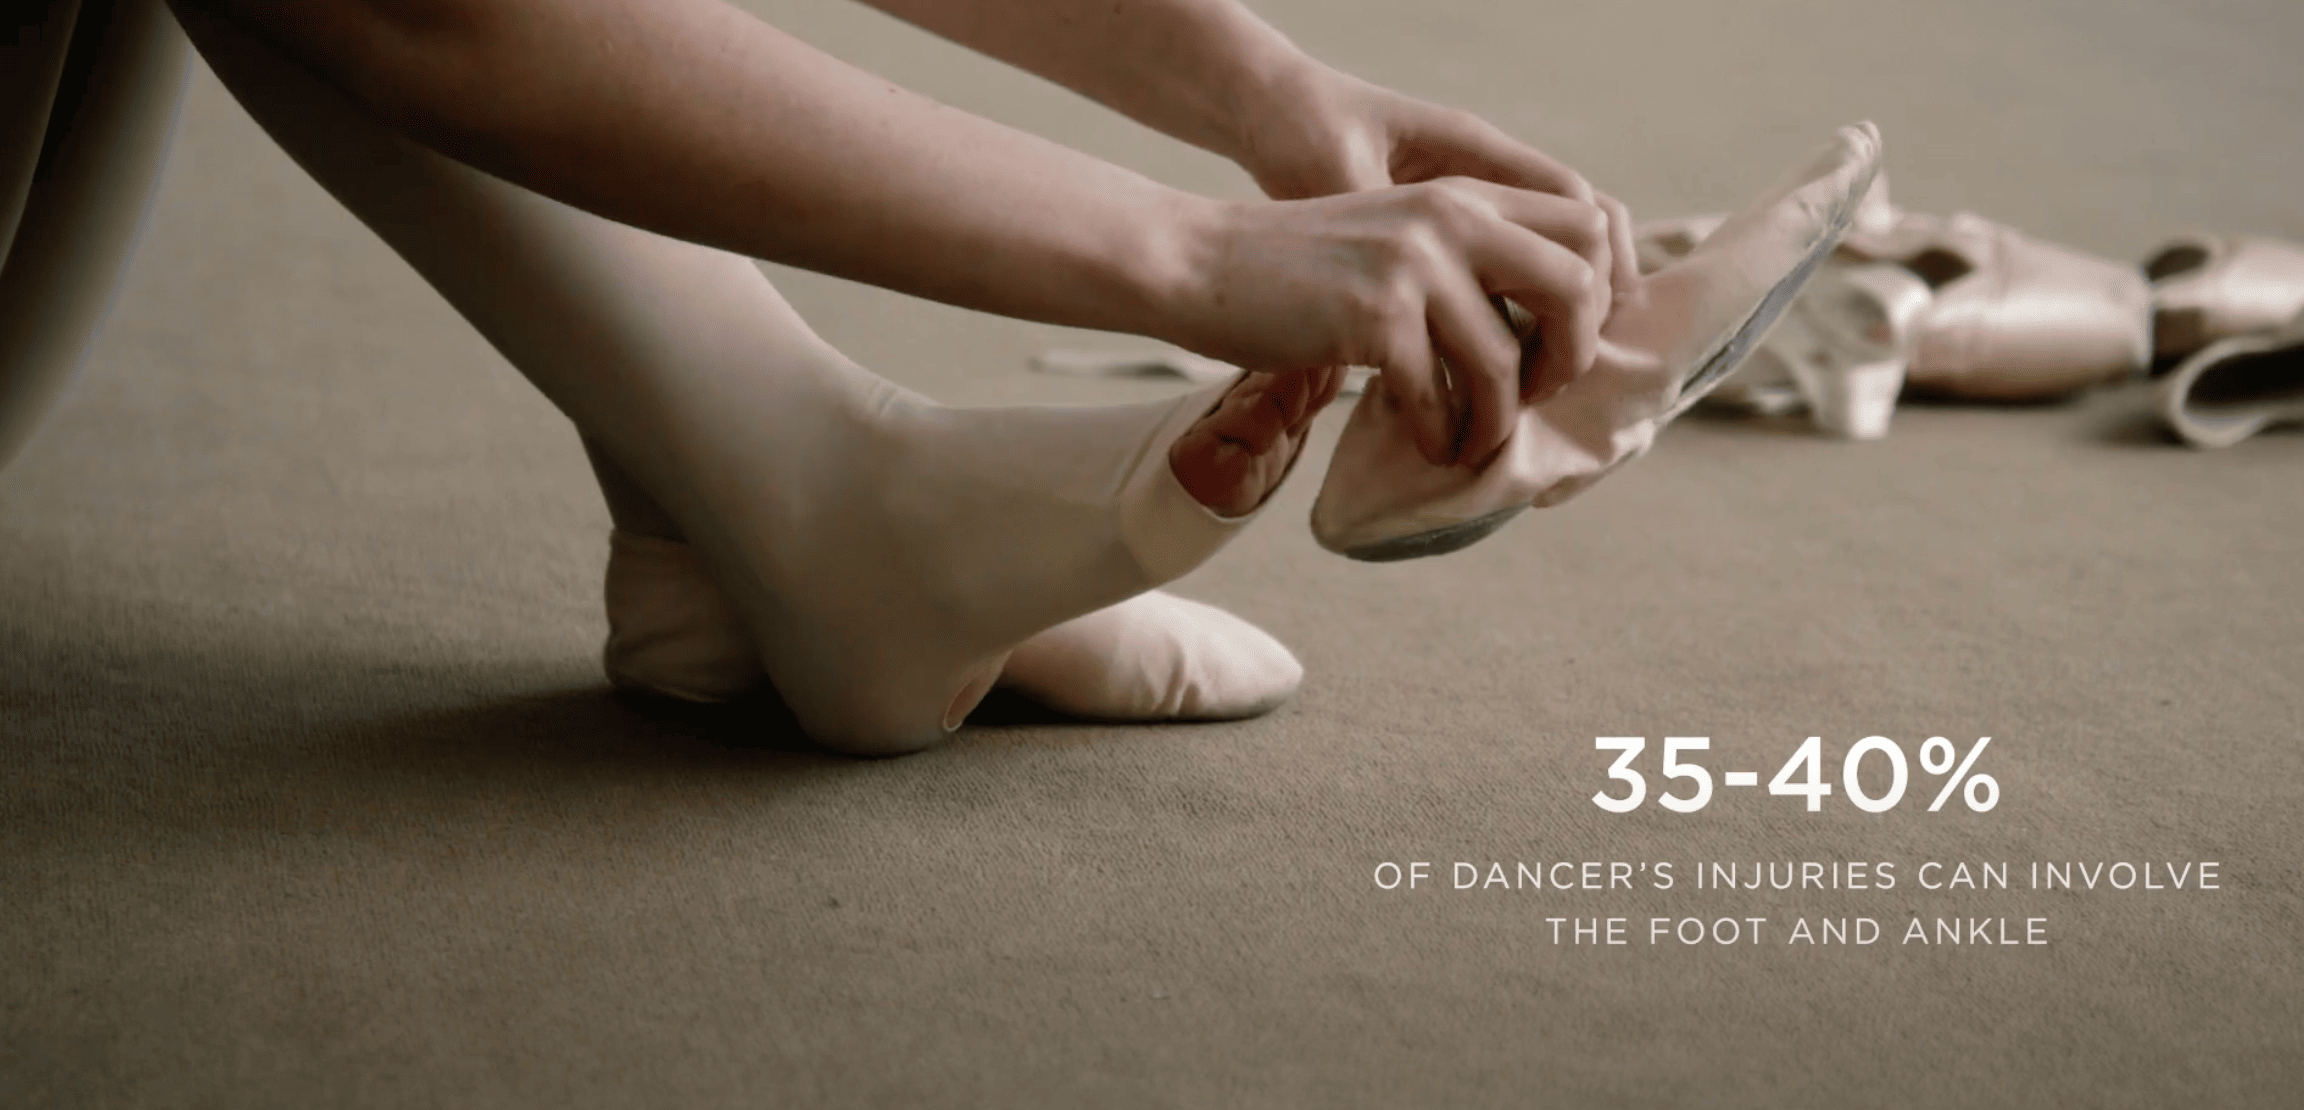 Balance Foot & Ankle - Foot & Ankle Support Tips for Dancers